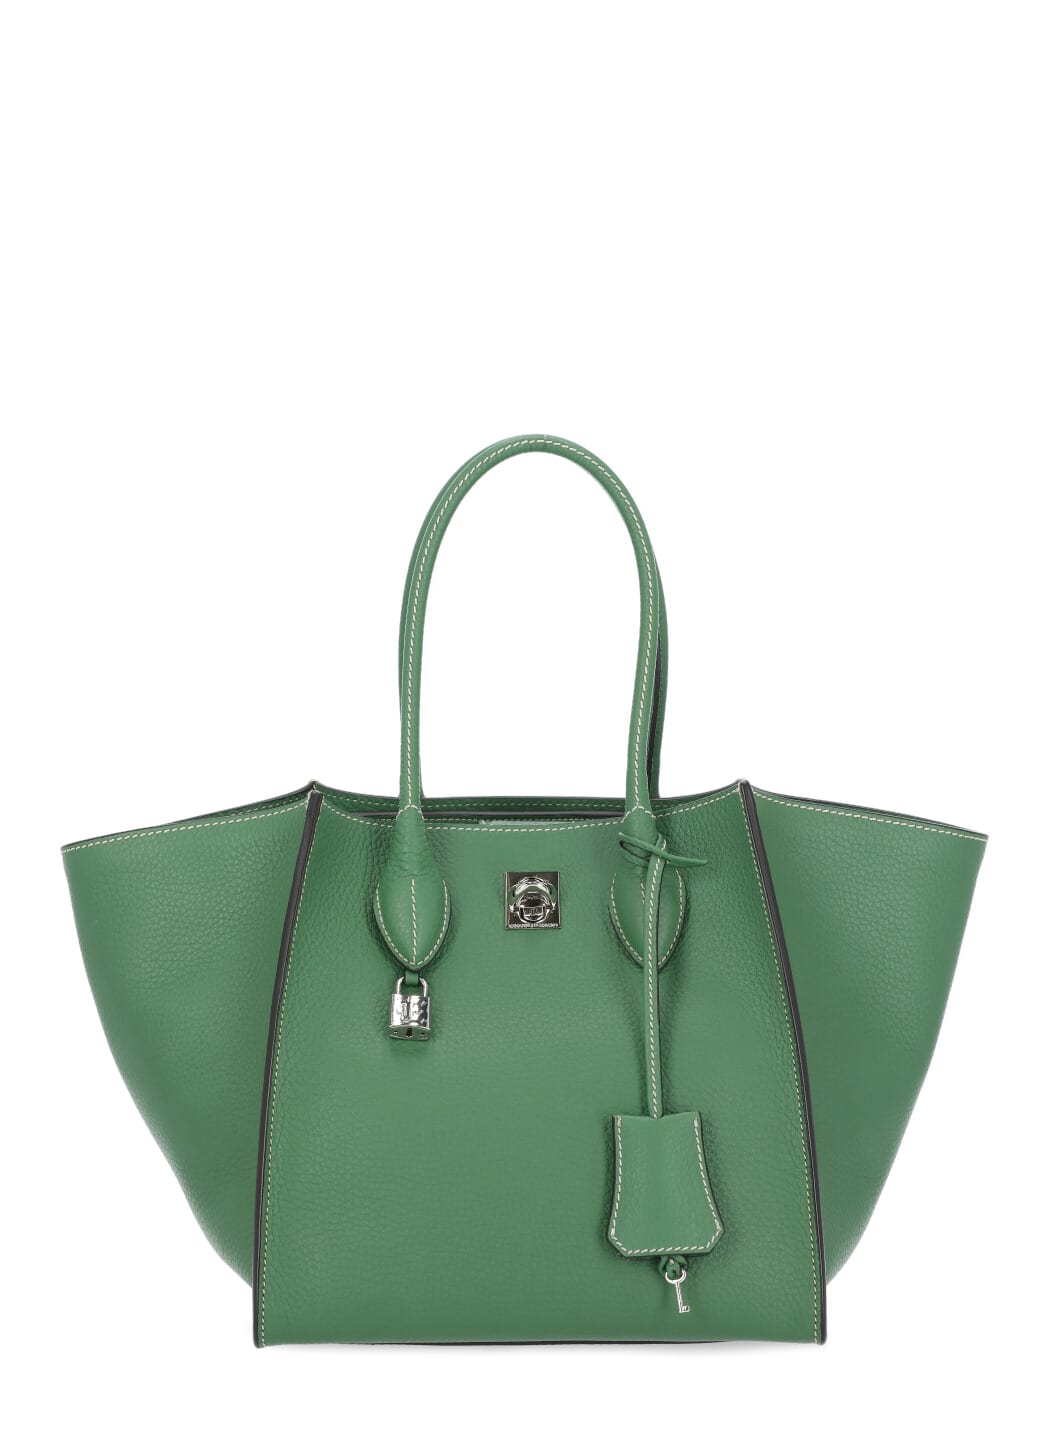 ERMANNO SCERVINO LEATHER MAGGIE SHOPPING BAG